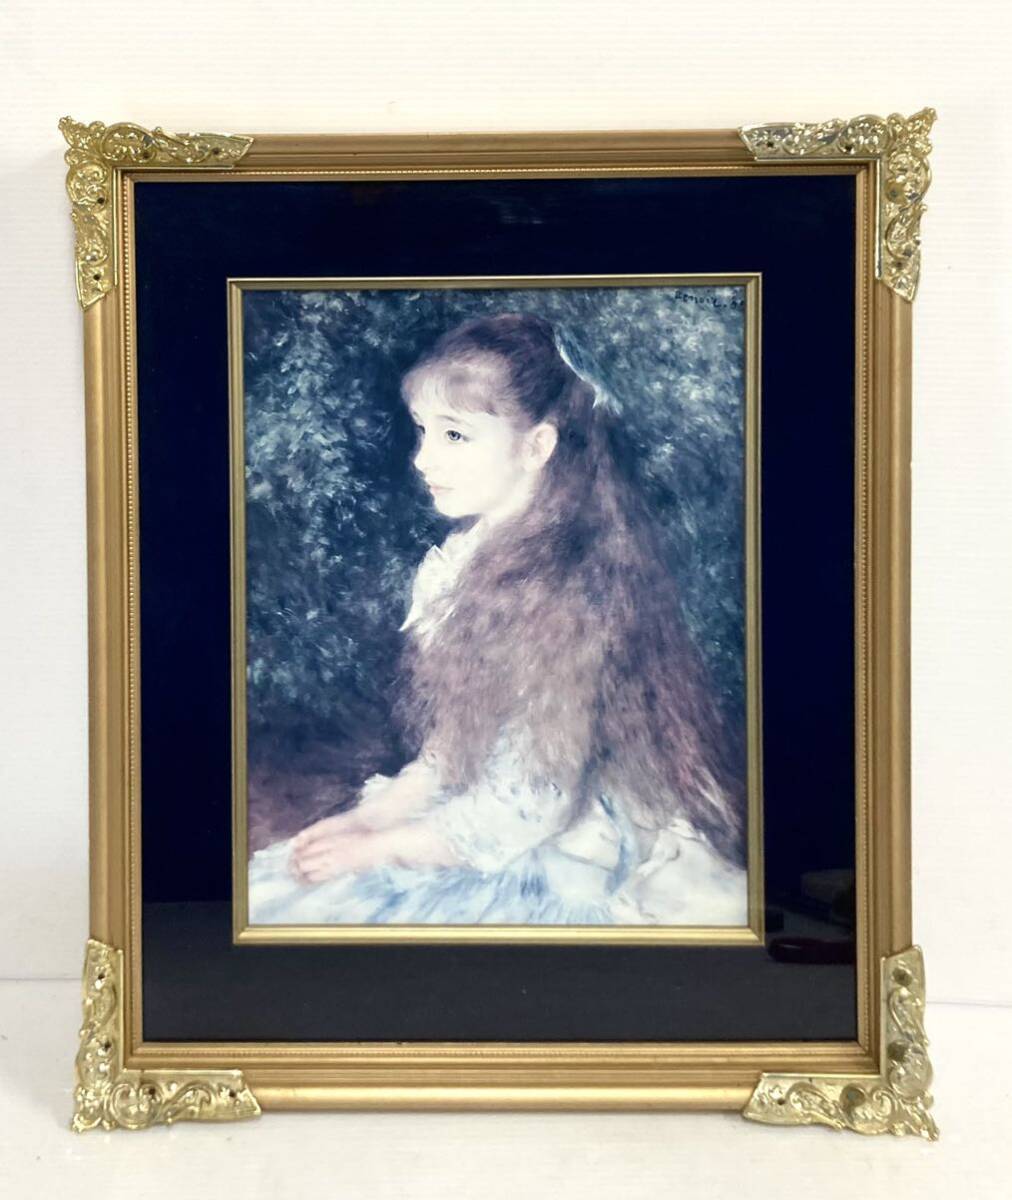 World masterpieces that live in the heart ◆ Lovely Irene / Renoir ◆ ACD painting Reproduction painting Frame size: 51.5cm wide x 60.8cm high, Artwork, Painting, others